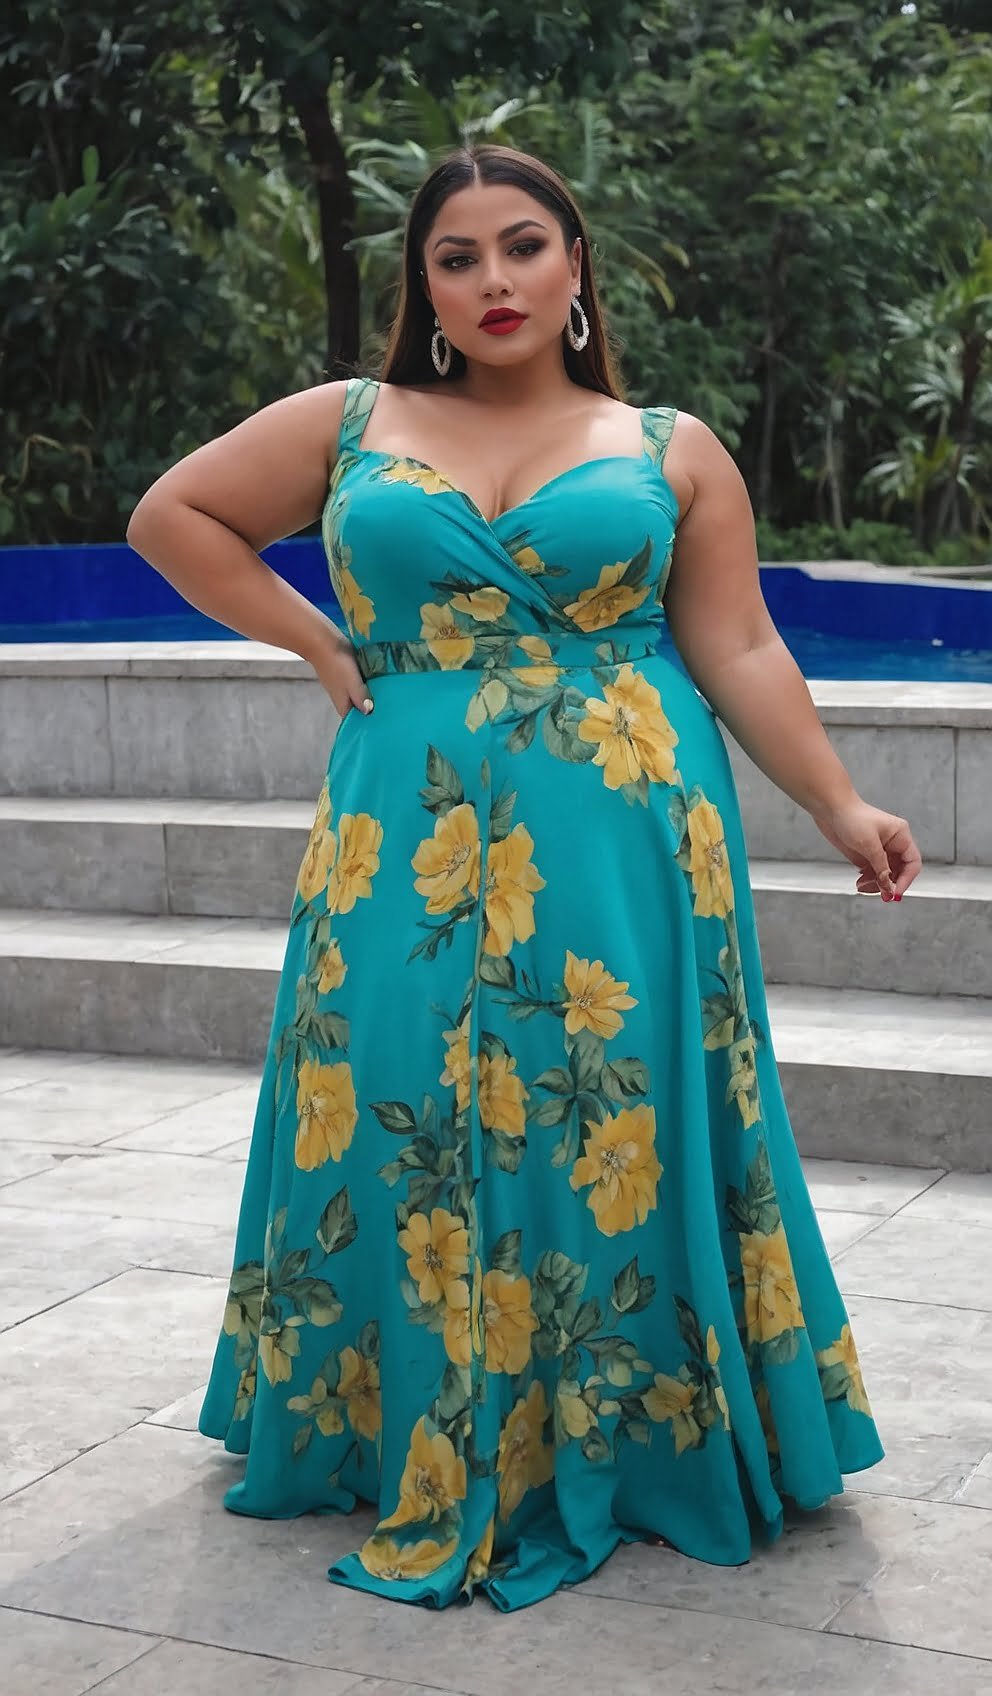 Azure Dream: Floral Maxi Dress with Summery Elegance